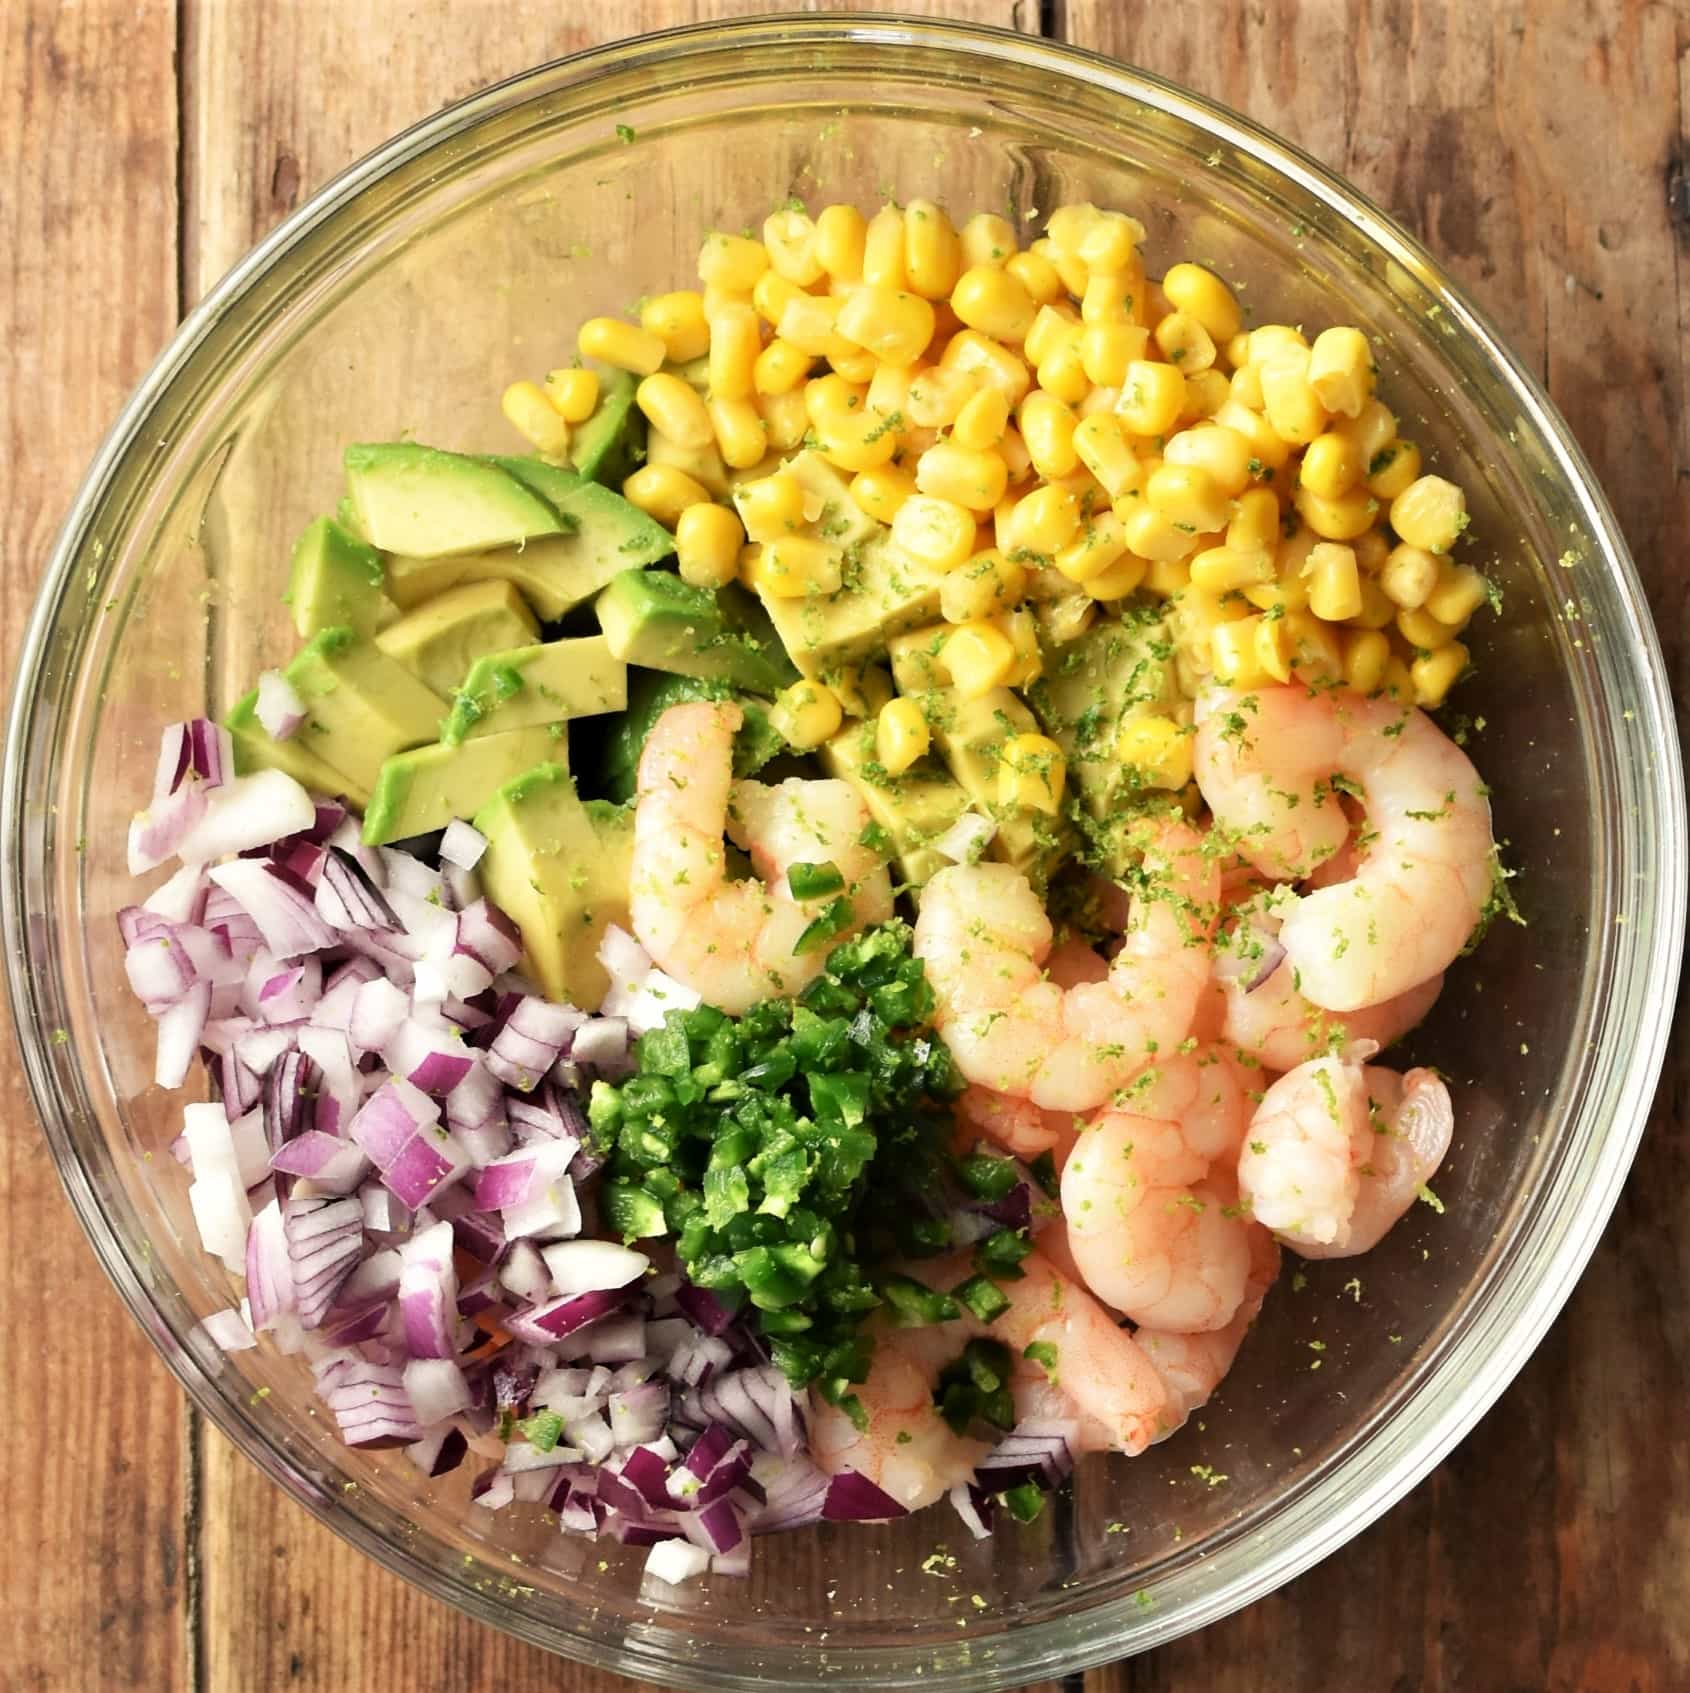 Shrimp, diced avocado, corn, chopped red onion and herbs in mixing bowl.